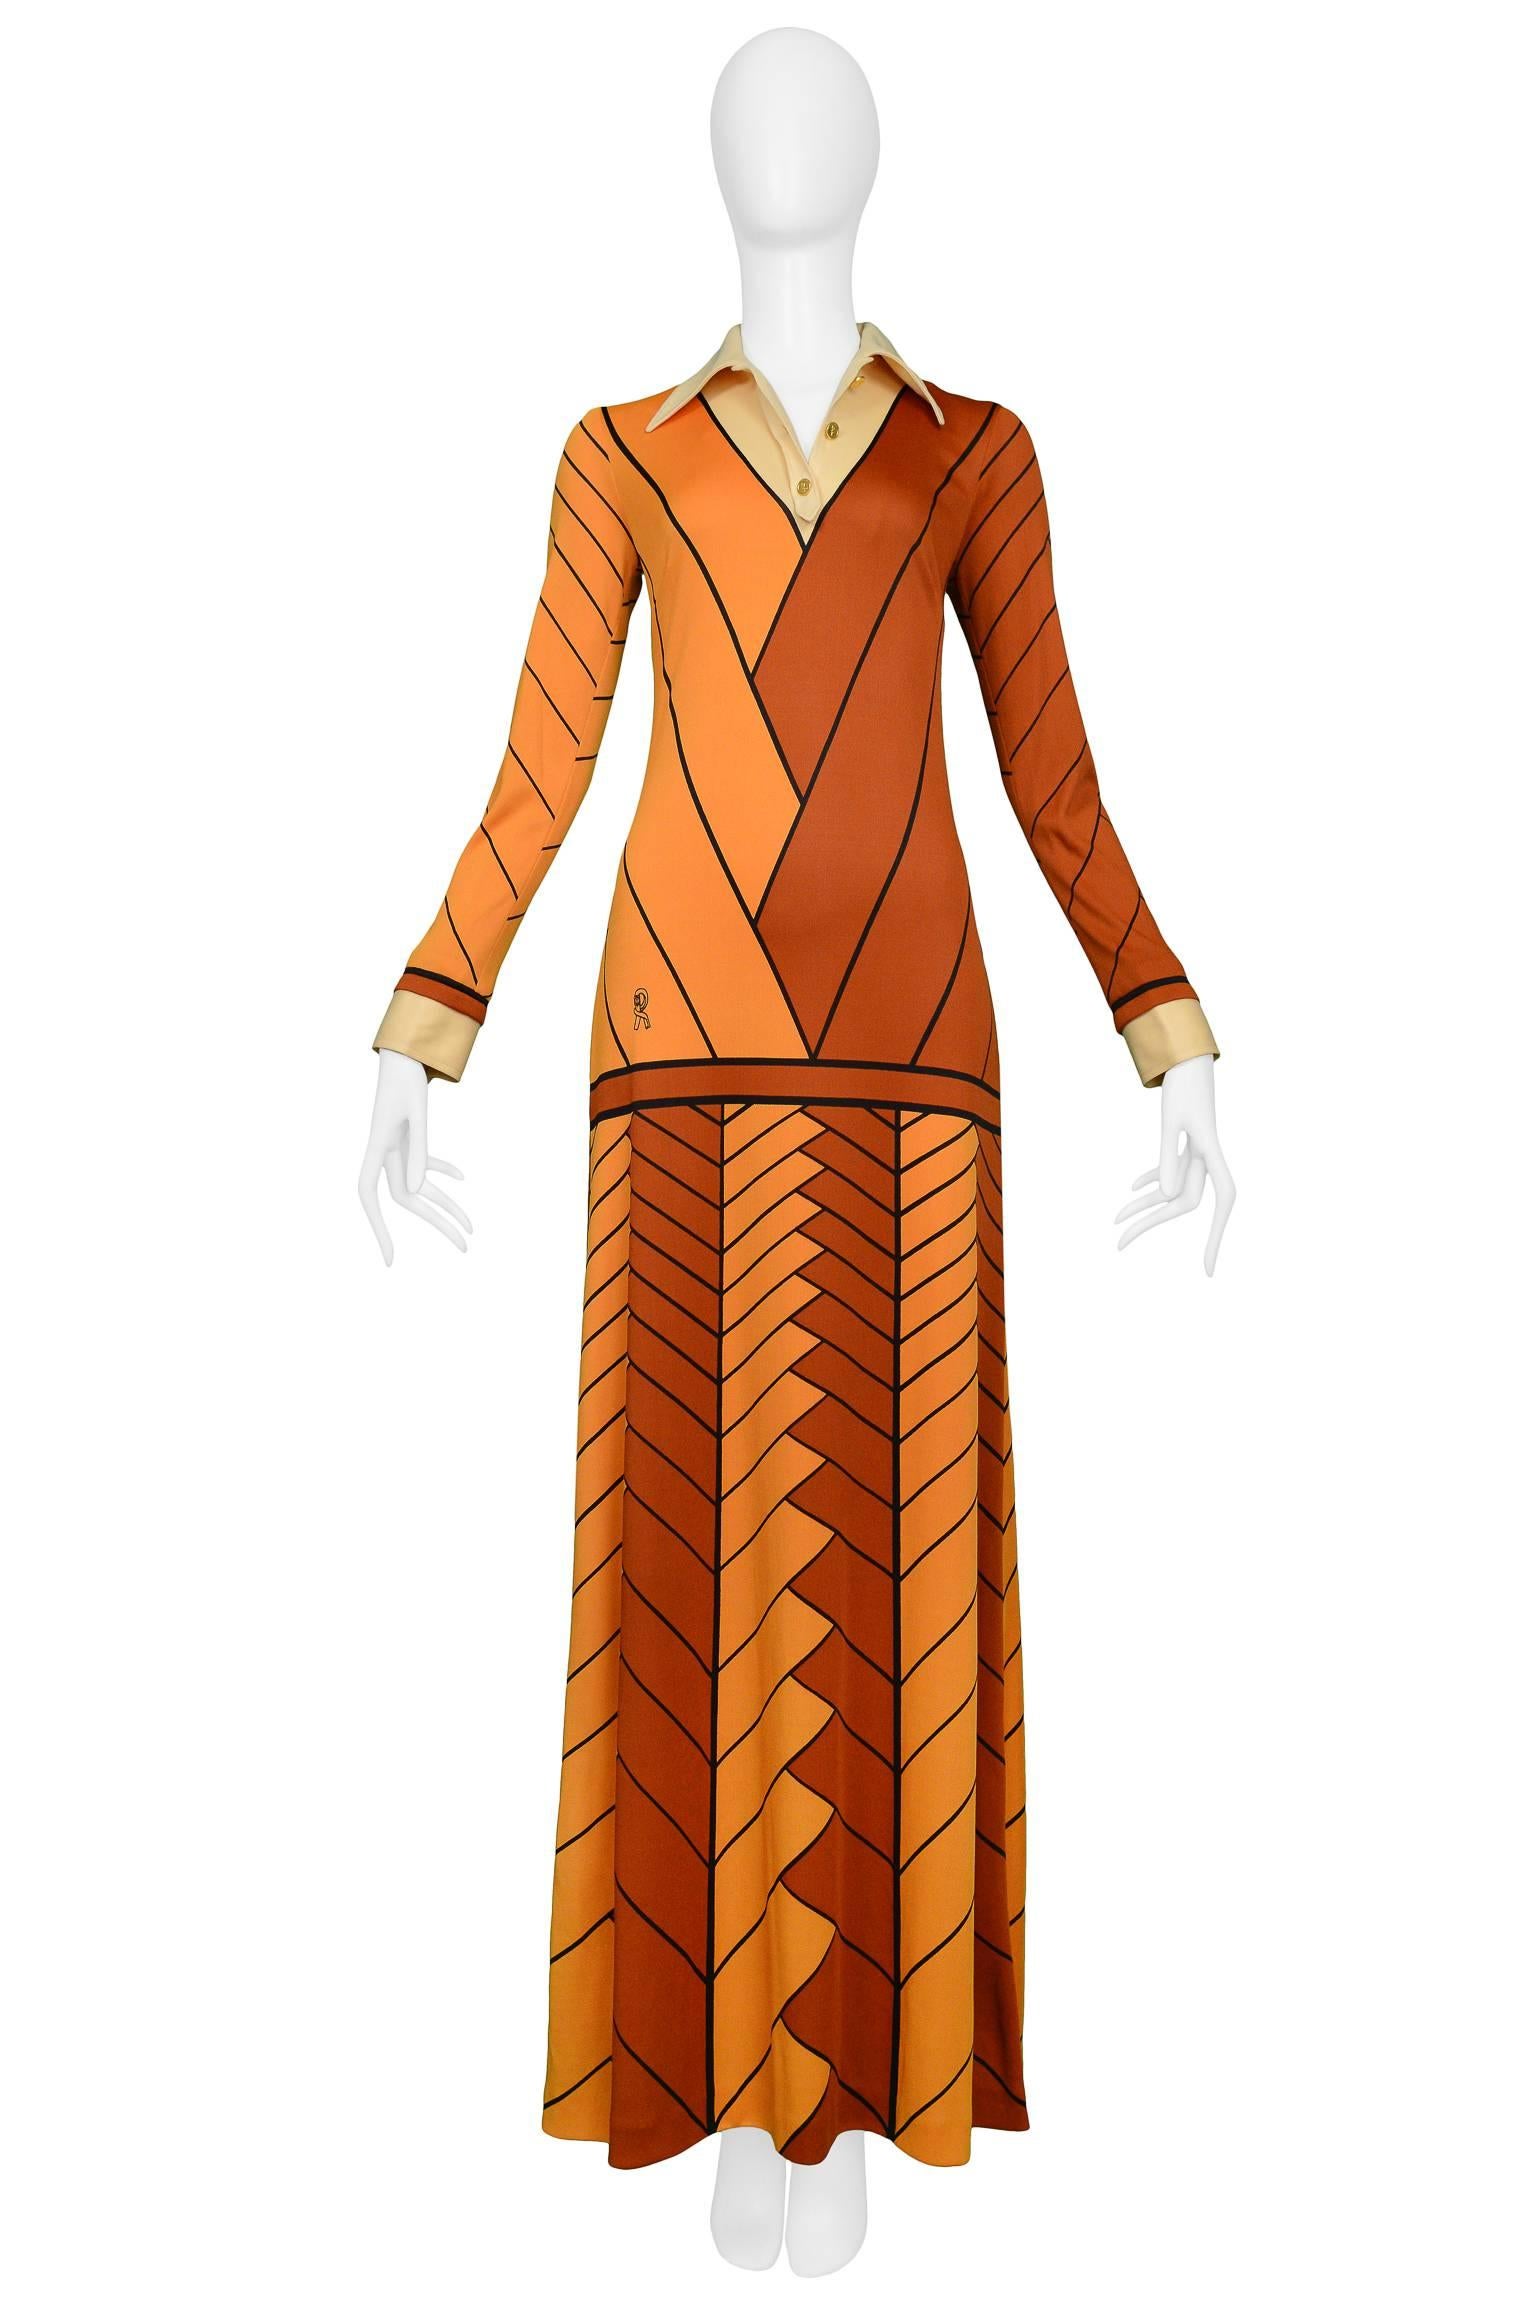 Vintage orange and rust Roberta di Camerino trompe l'oeil jersey maxi dress with sleeves. Dress features signature Roberta print and gold tone buttons. Roberta di Camerino archive sample dress. Circa 1970's.